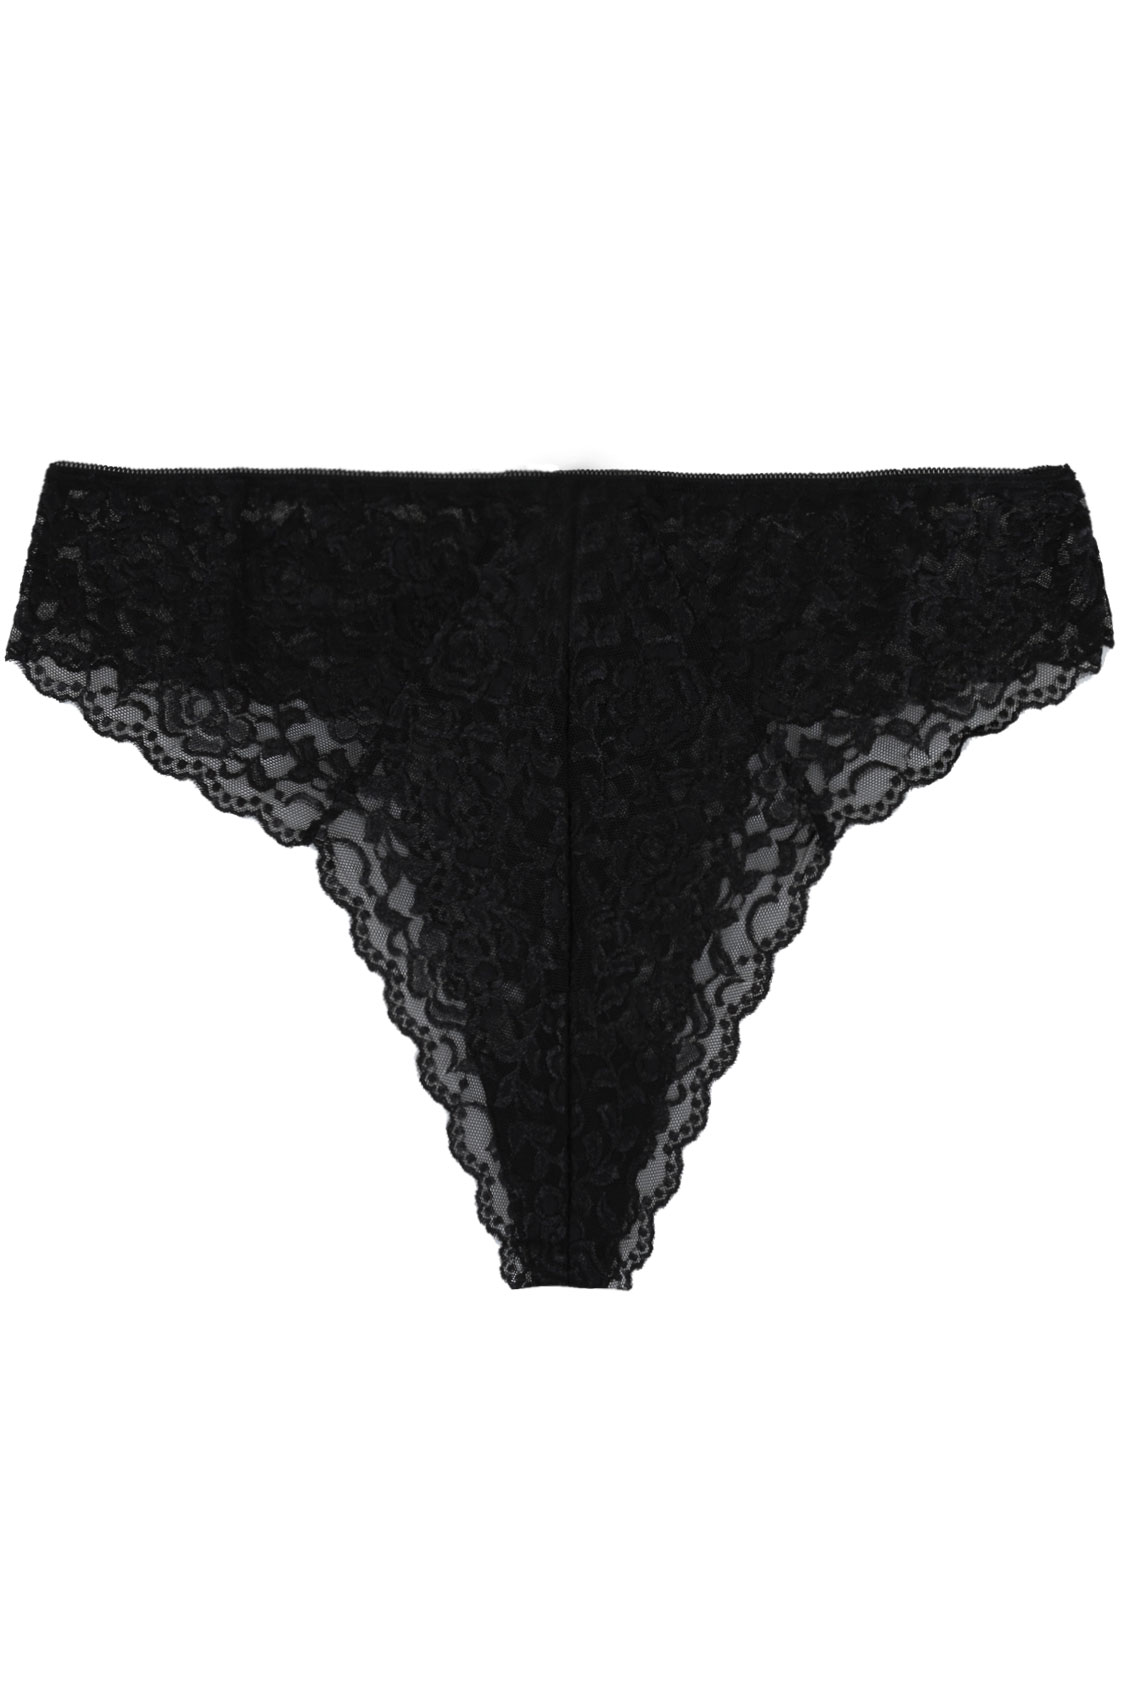 Black Lace Thong With Bow Detail Plus Size 16 to 36